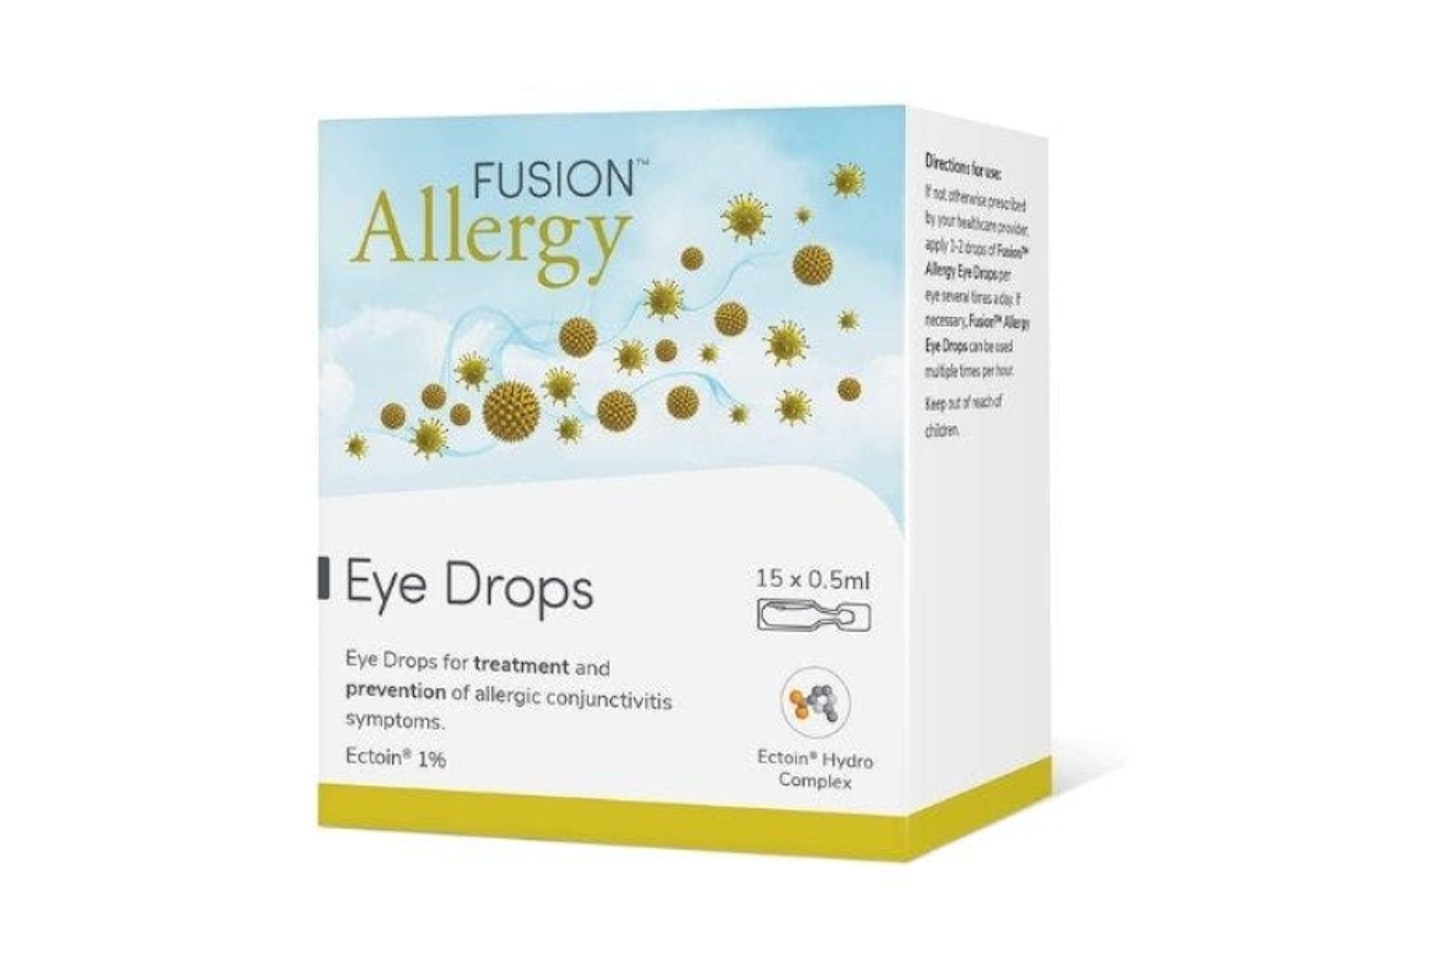 Fusion Allergy Eye Drops -  one of the best hay fever eye drops